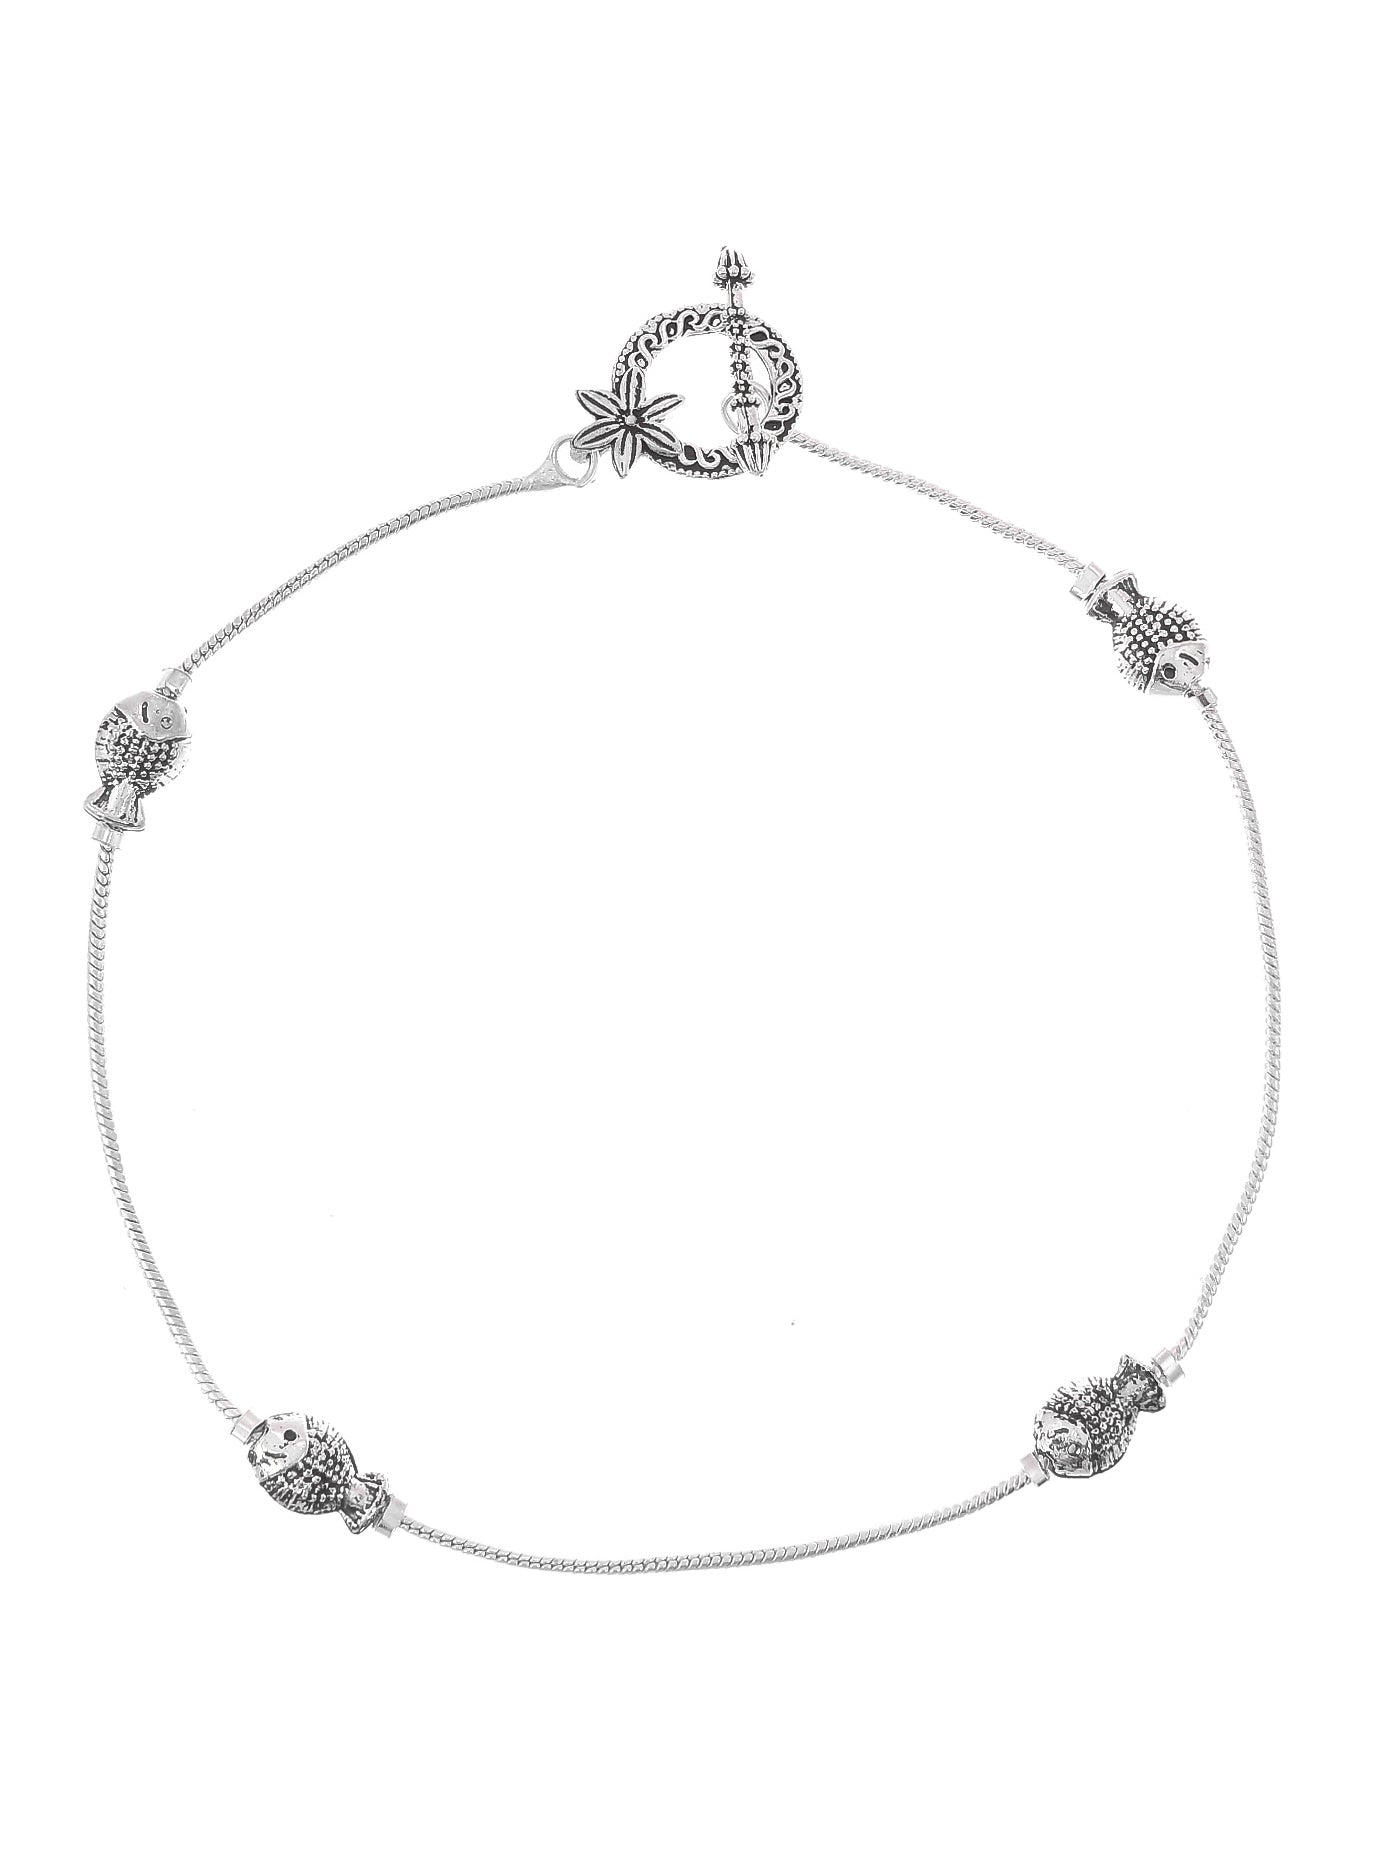 Silver Toned Handcrafted Anklet With Fish Charm Beads